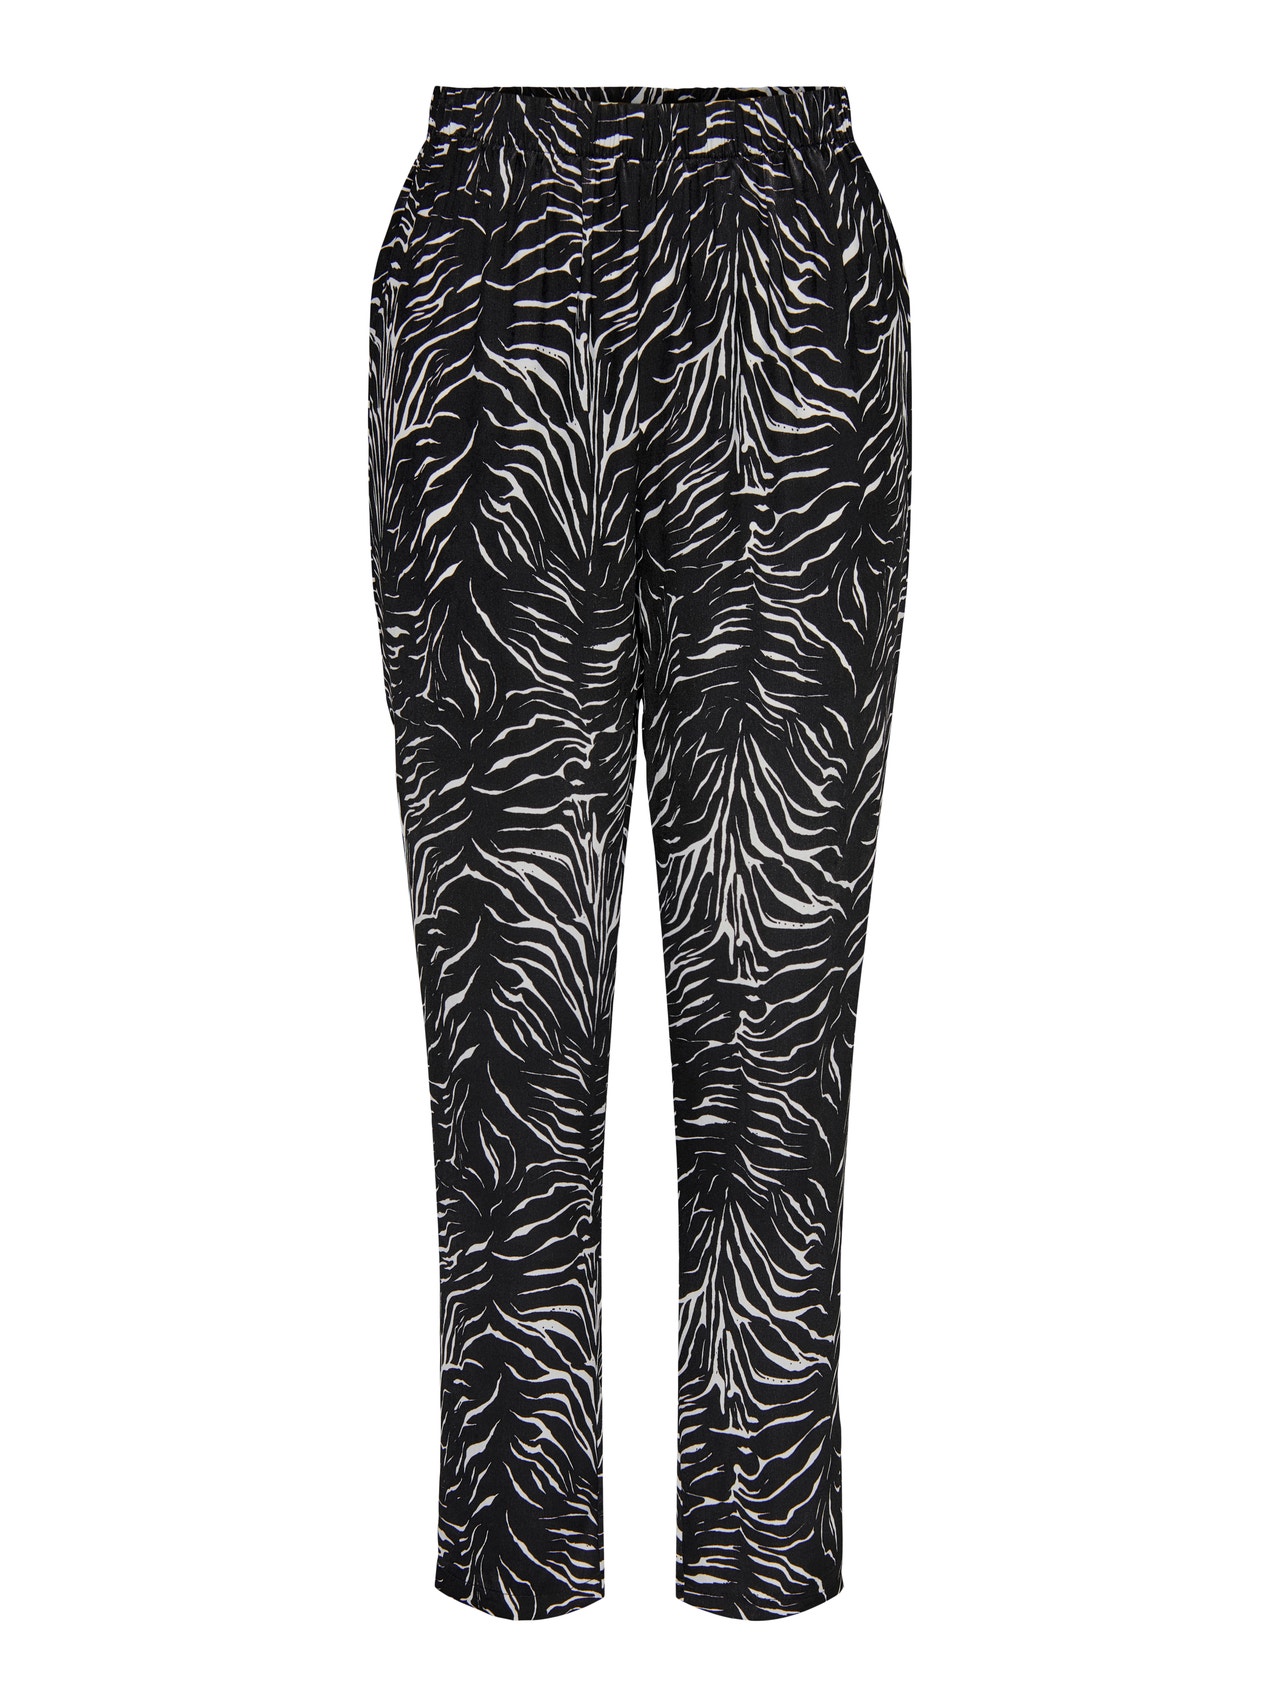 ONLY Printed Trousers -Black - 15275841